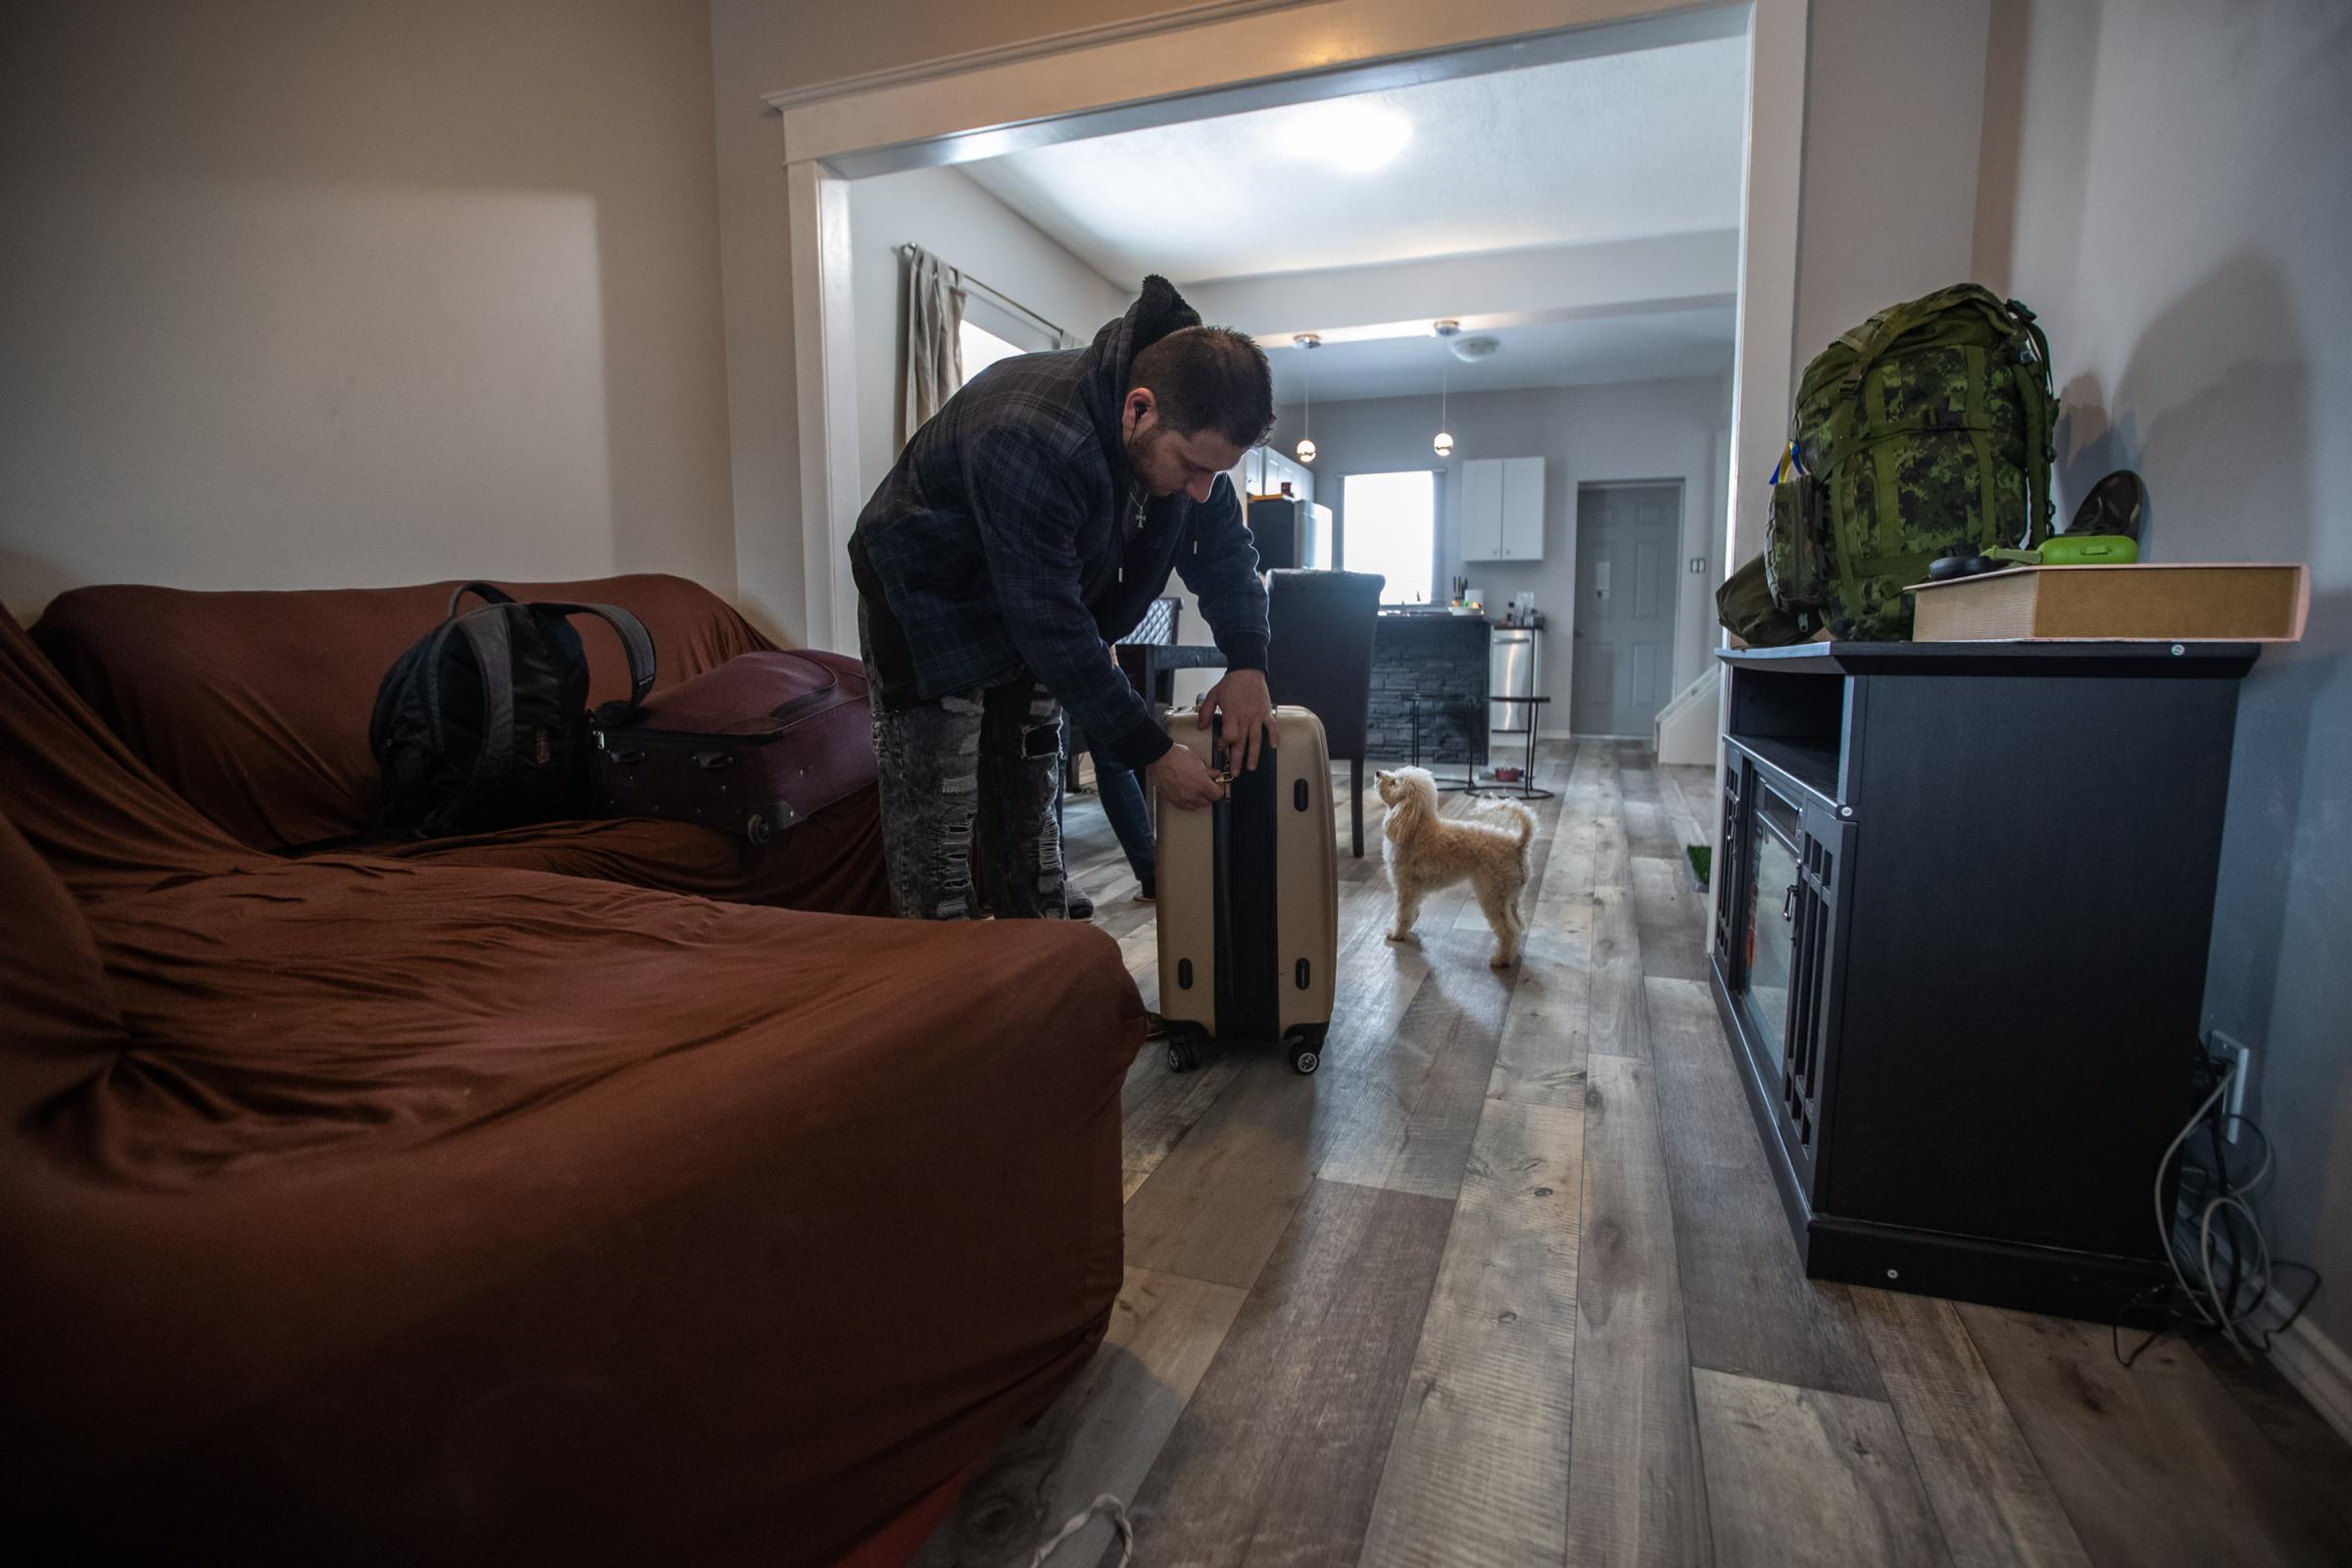 Vartan Davtian closes a suitcase as he prepares to leave his home in Brandon, Manitoba, and travel to Europe to support the Ukrainian resistance....